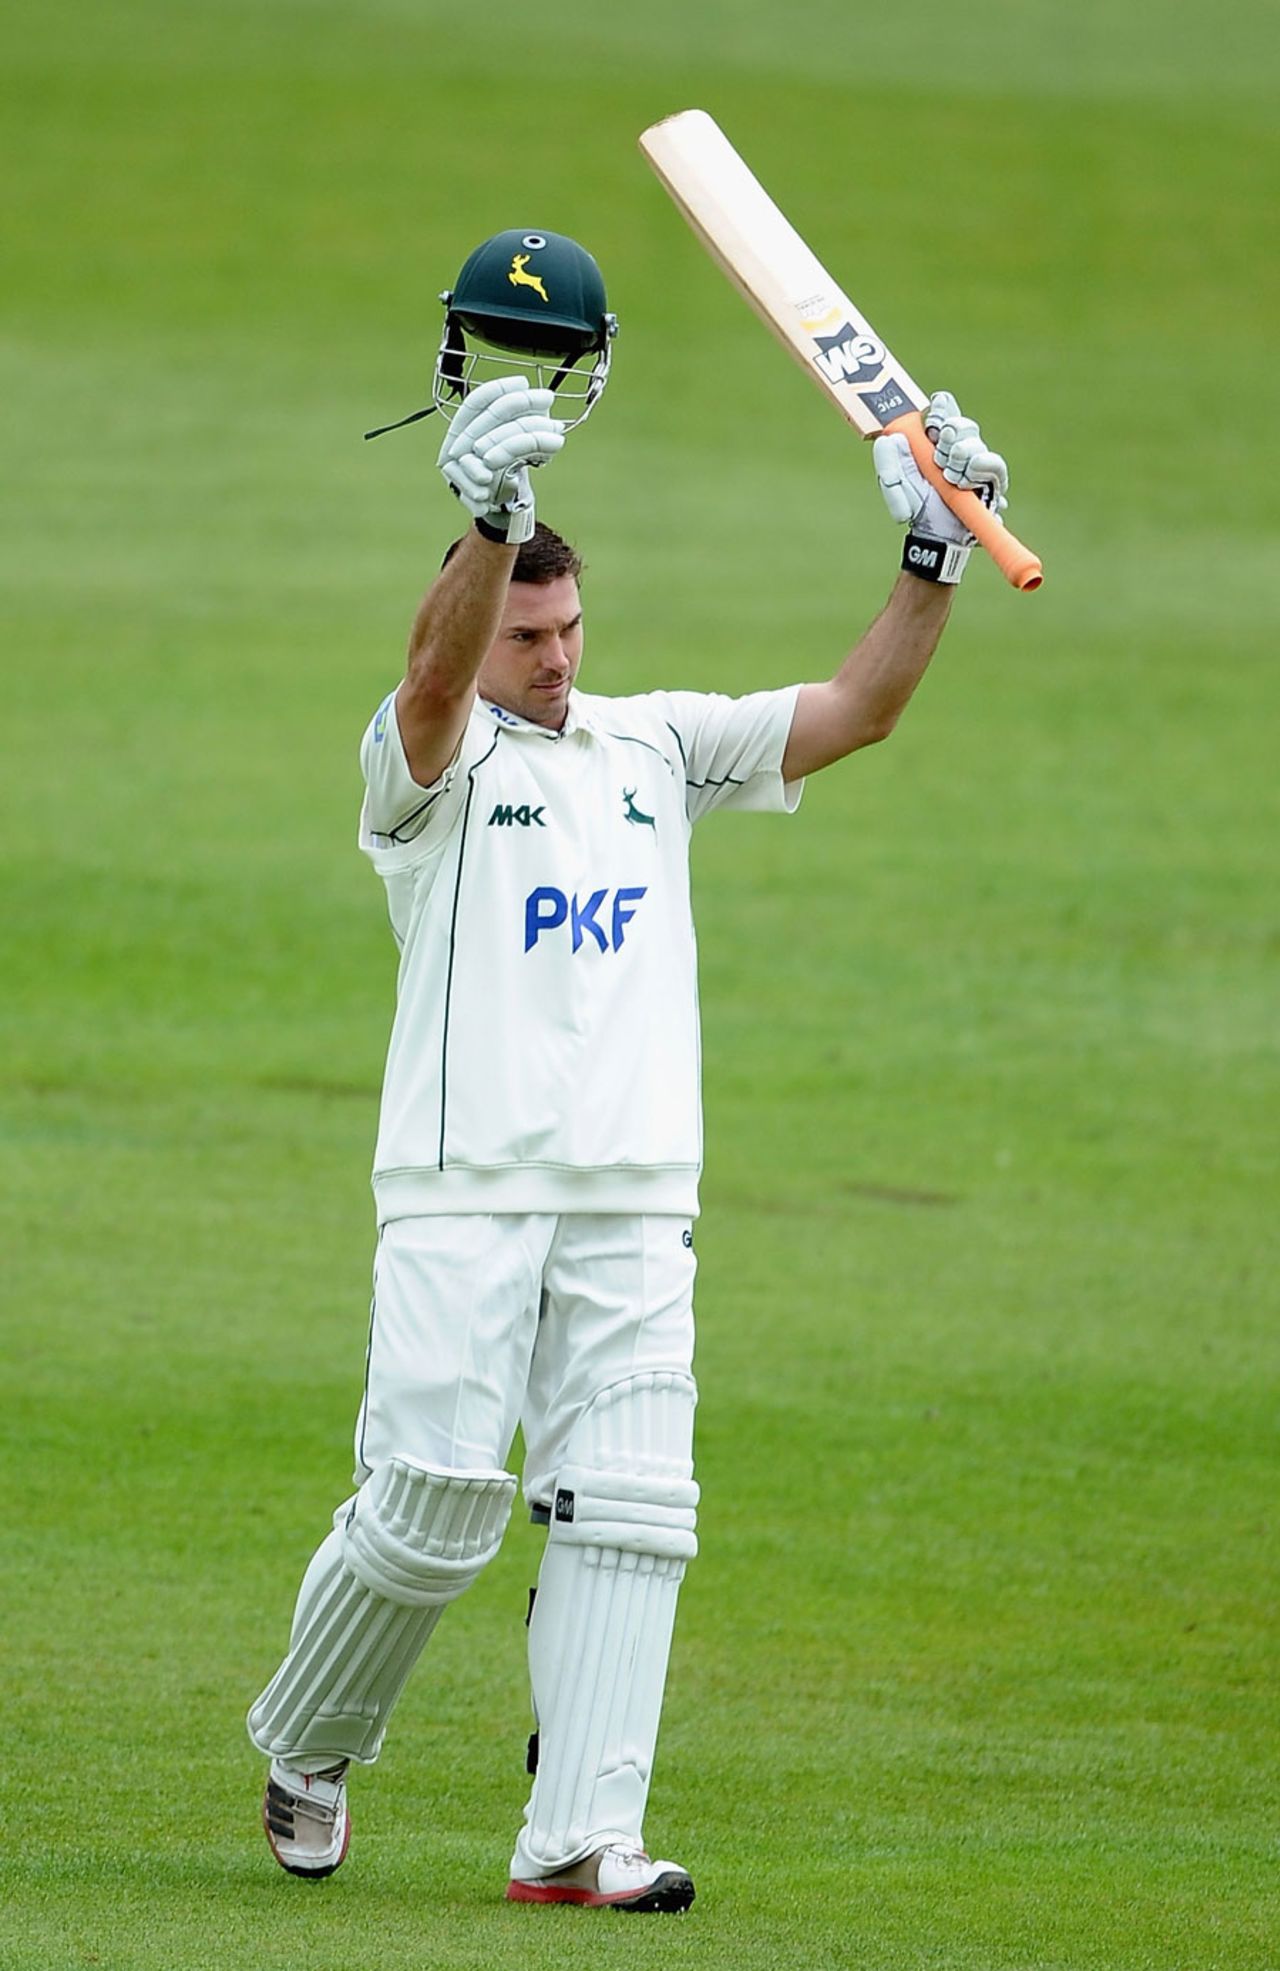 Michael Lumb celebrates reaching his century, Nottinghamshire v Middlesex, County Championship, Division One, 2nd day, Trent Bridge, May 10, 2012